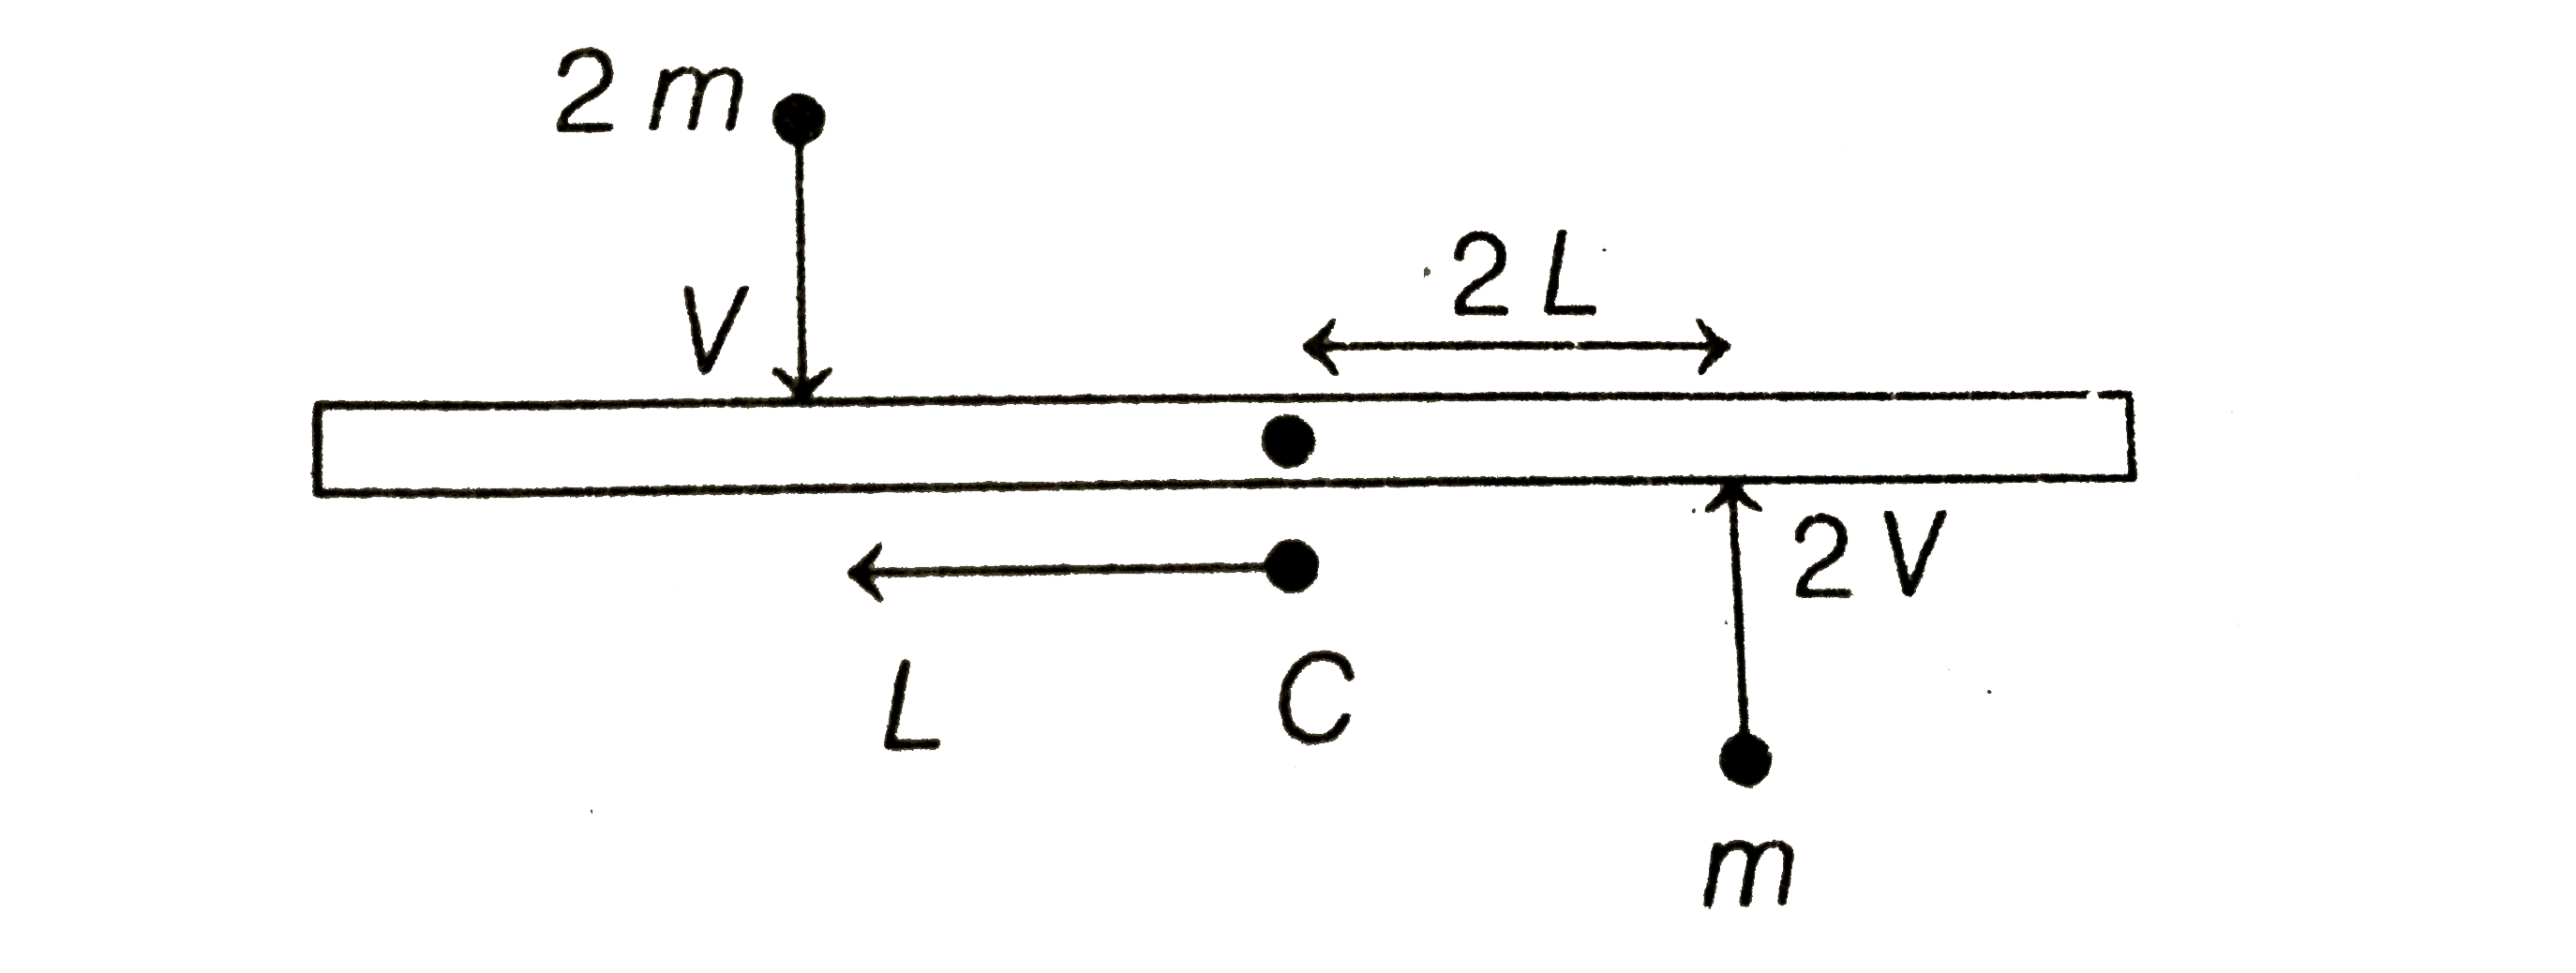 A uniform rod of length '6L' and mass '8 m' is pivoted at its centre 'C'. Two masses 'm' and '2m' with speed 2v, v as shown strikes the rod and stick to the rod. Initially the rod is at rest. Due to impact, if it rotates with angular velocity 'omega' then 'omega' will be